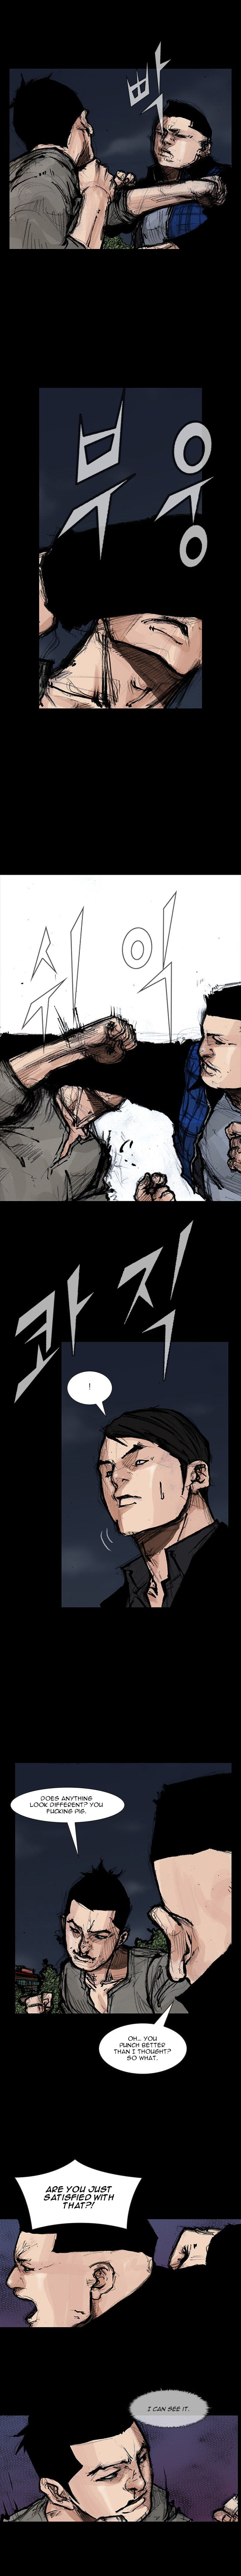 Dokgo 2 Chapter 10 Page 8